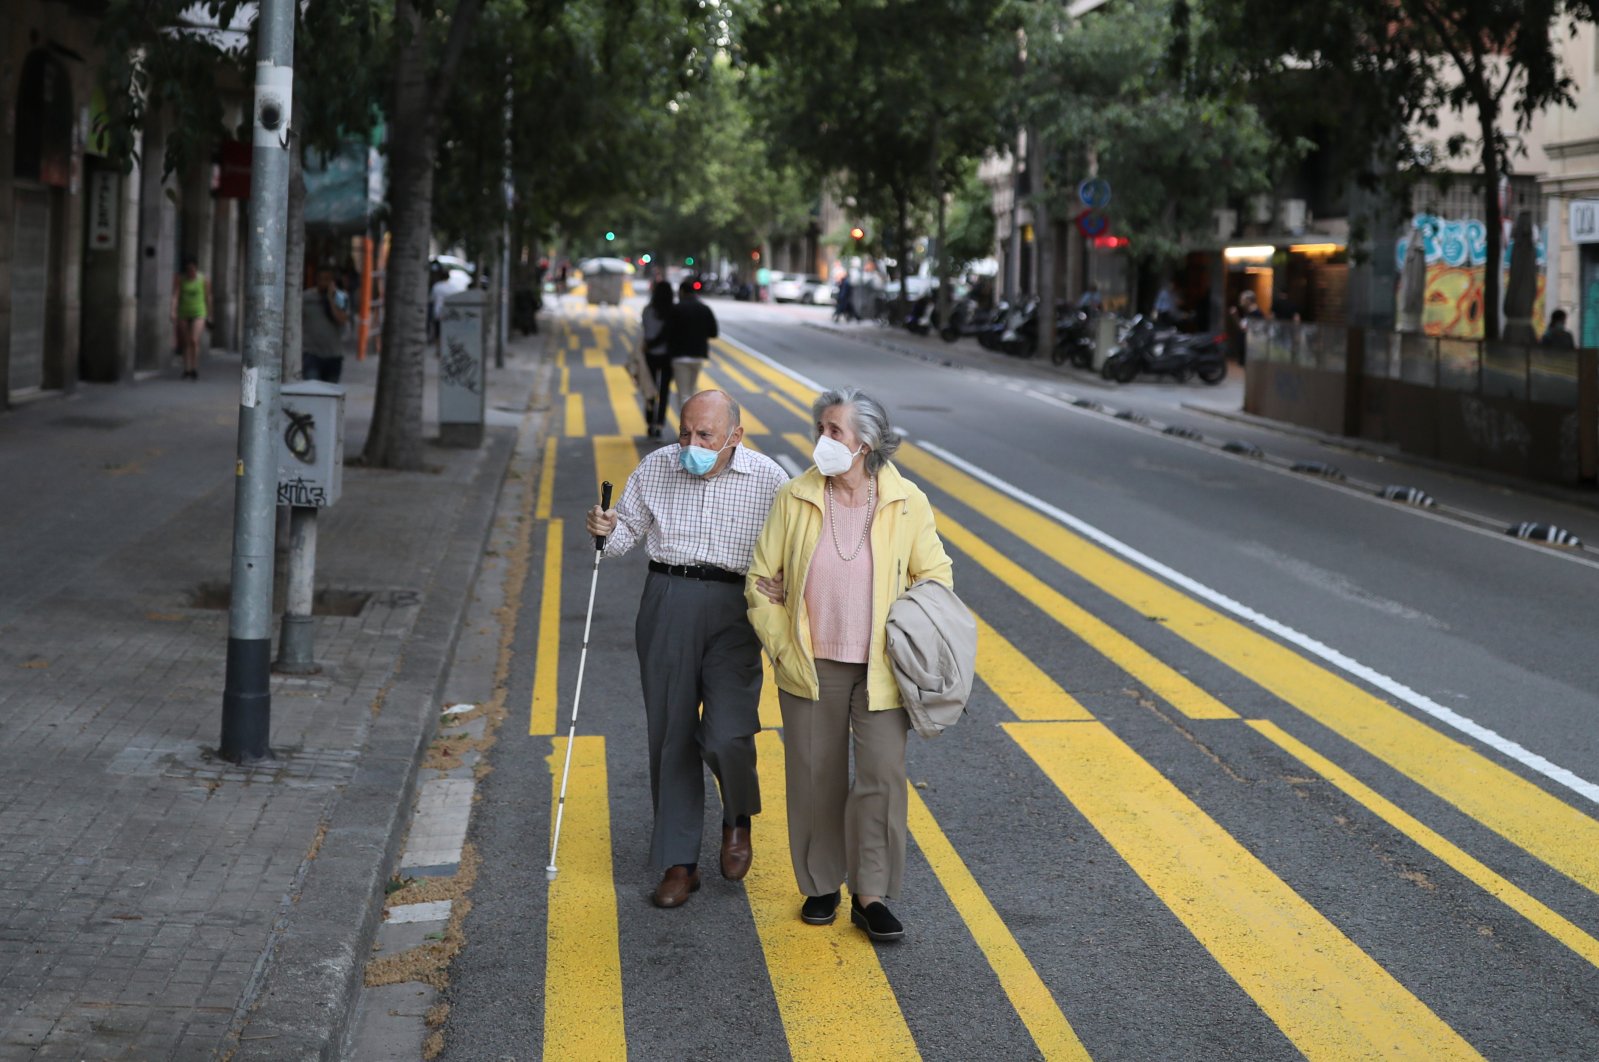 An elderly couple wearing face masks walks on a sidewalk marked for pedestrians to keep social distance, Barcelona, May 11, 2020. (REUTERS Photo)